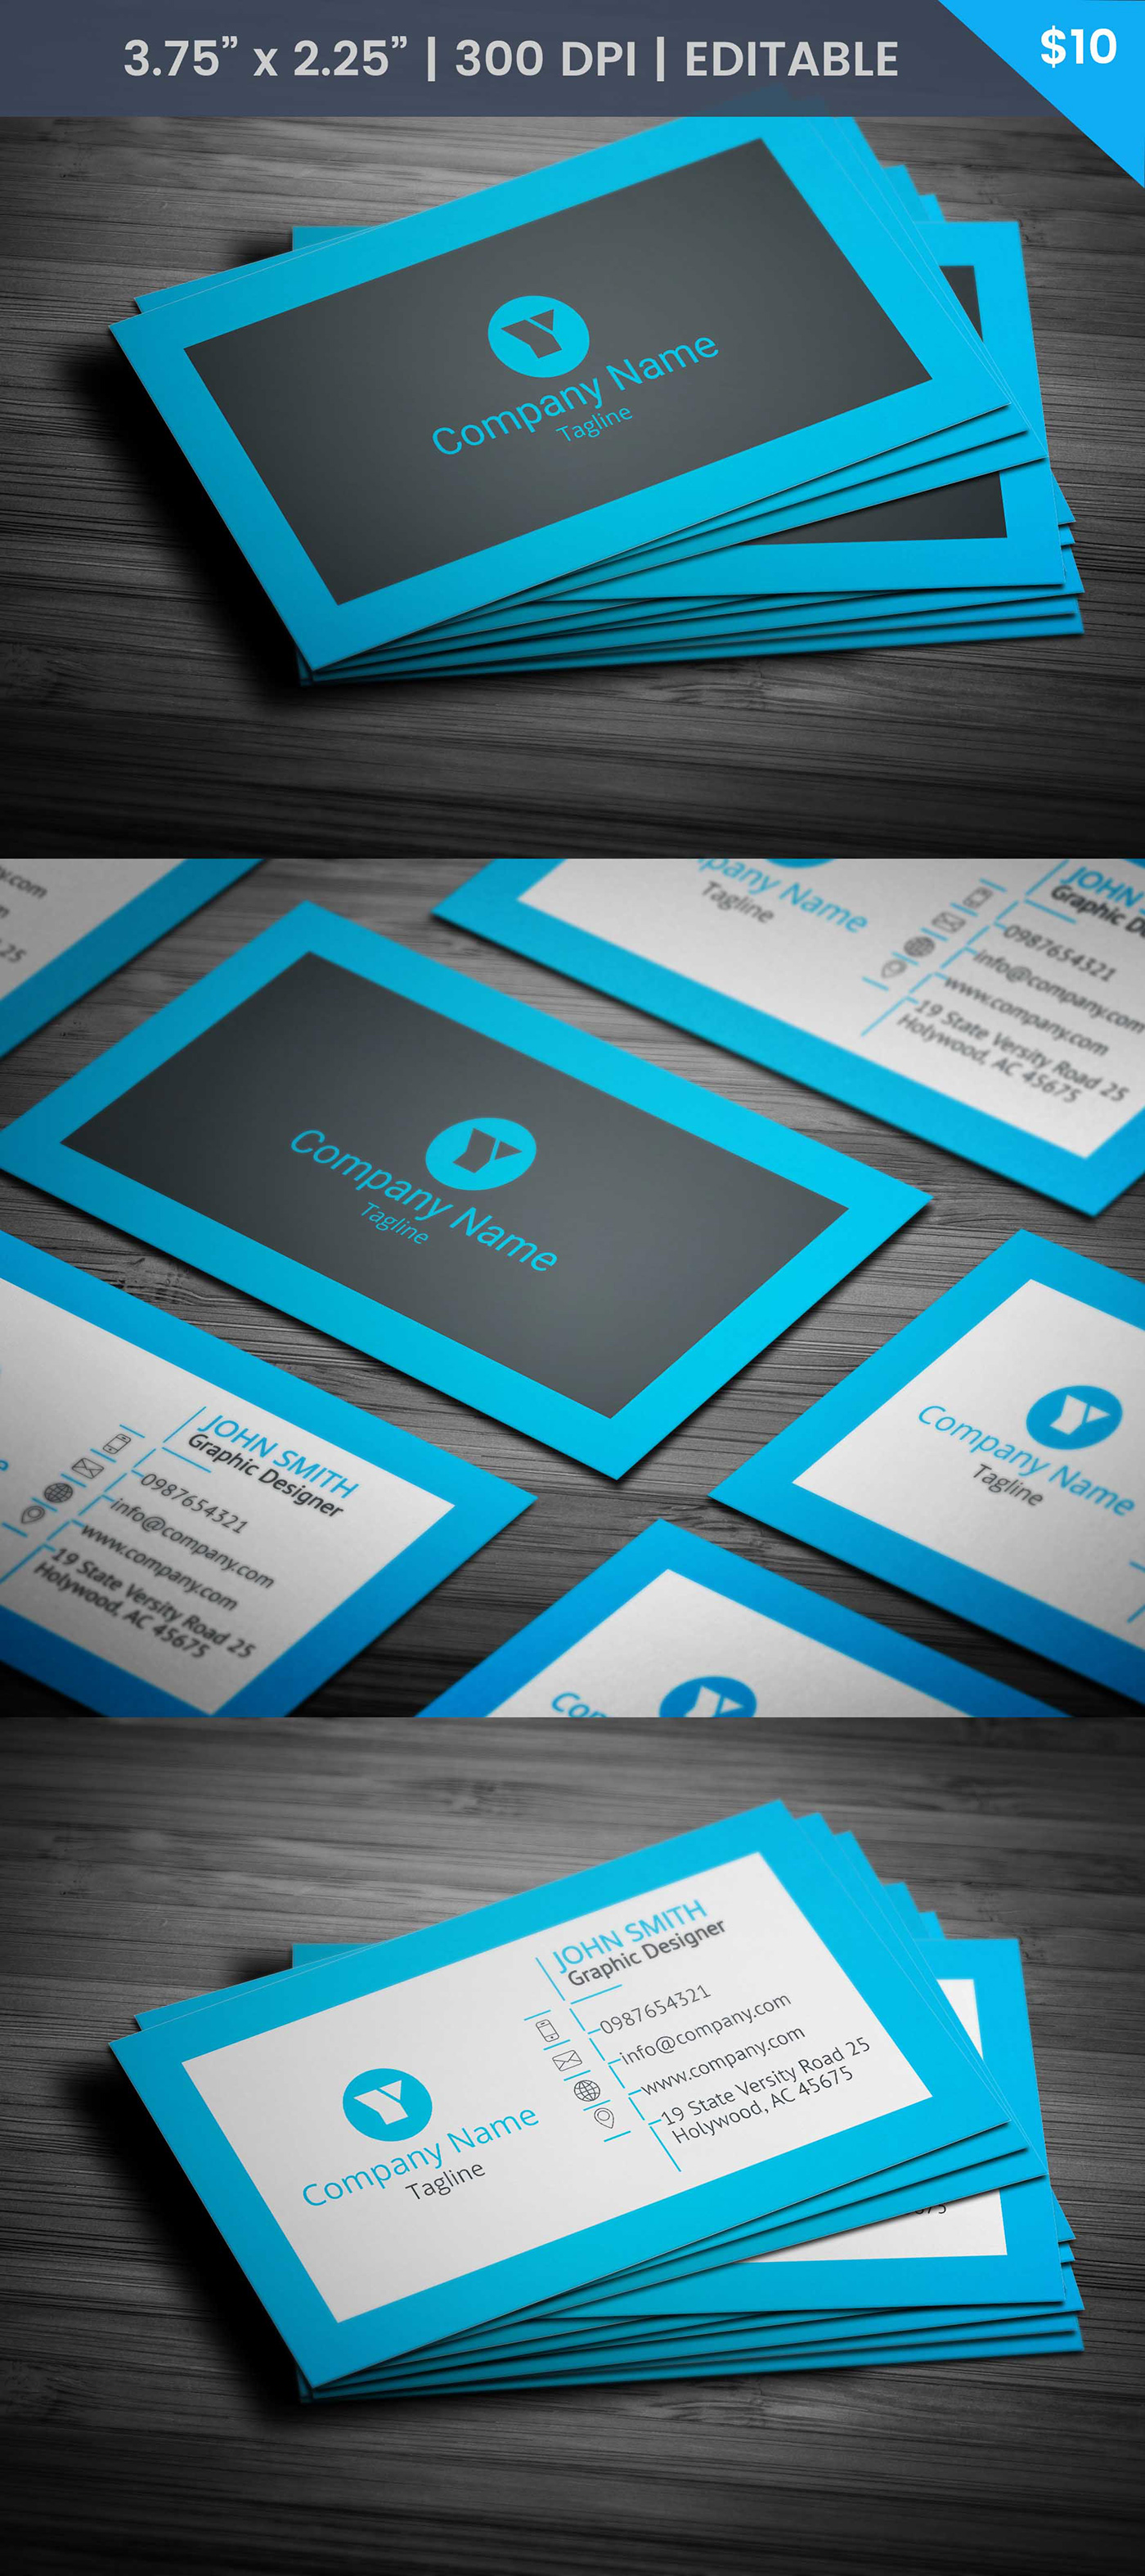 contractor business card Business card design templates